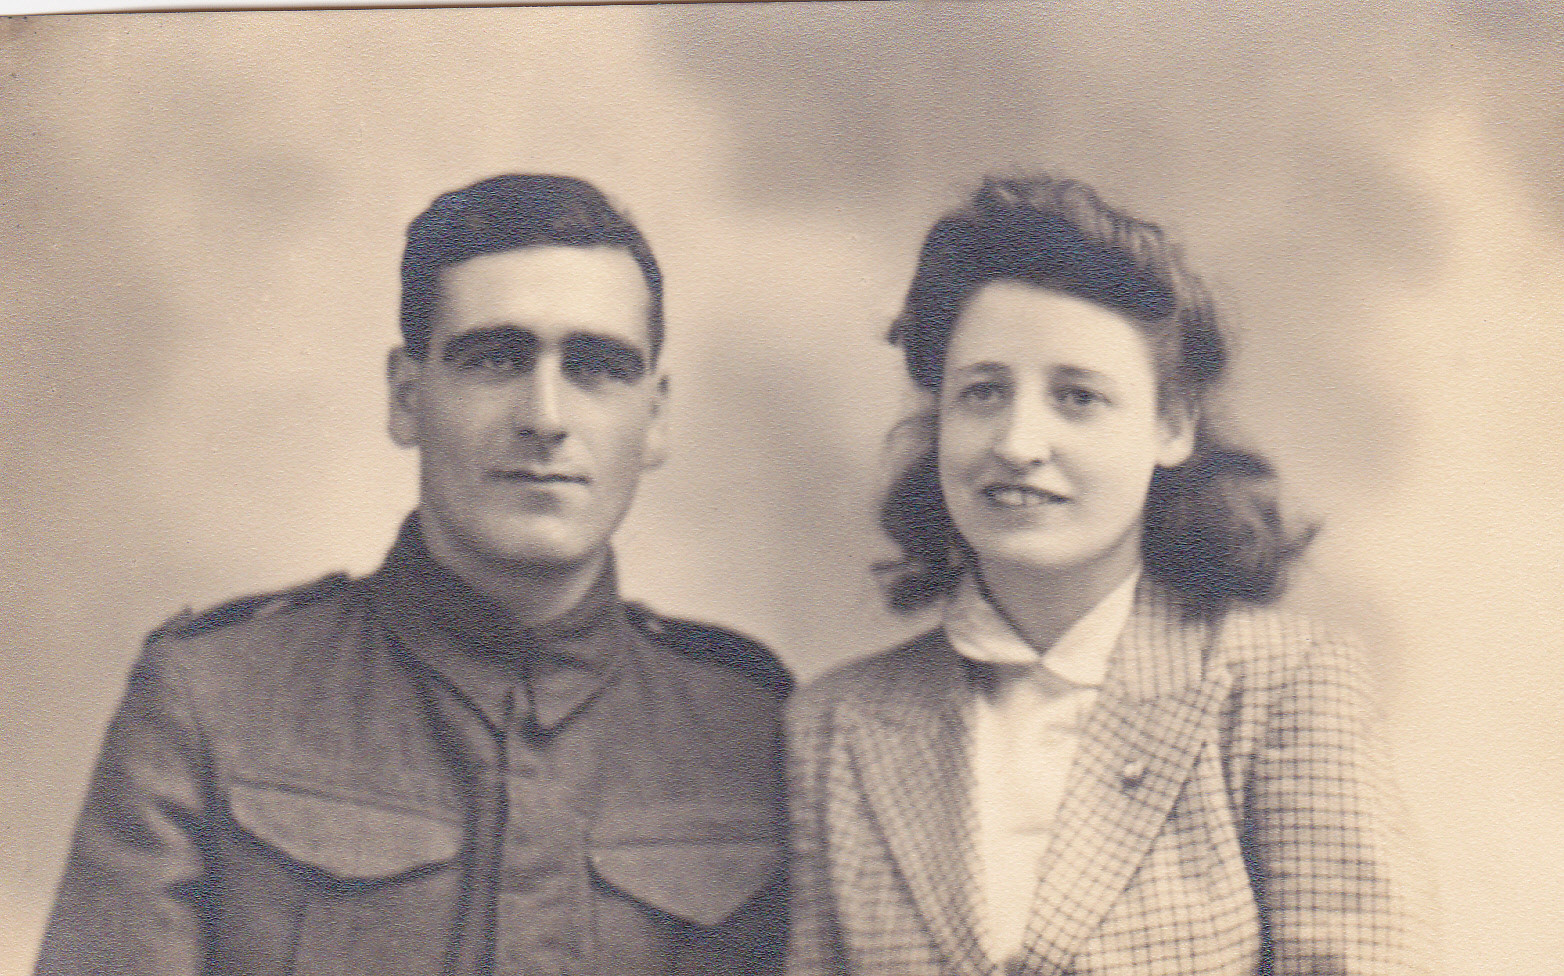 My Grandmother and someone 1945